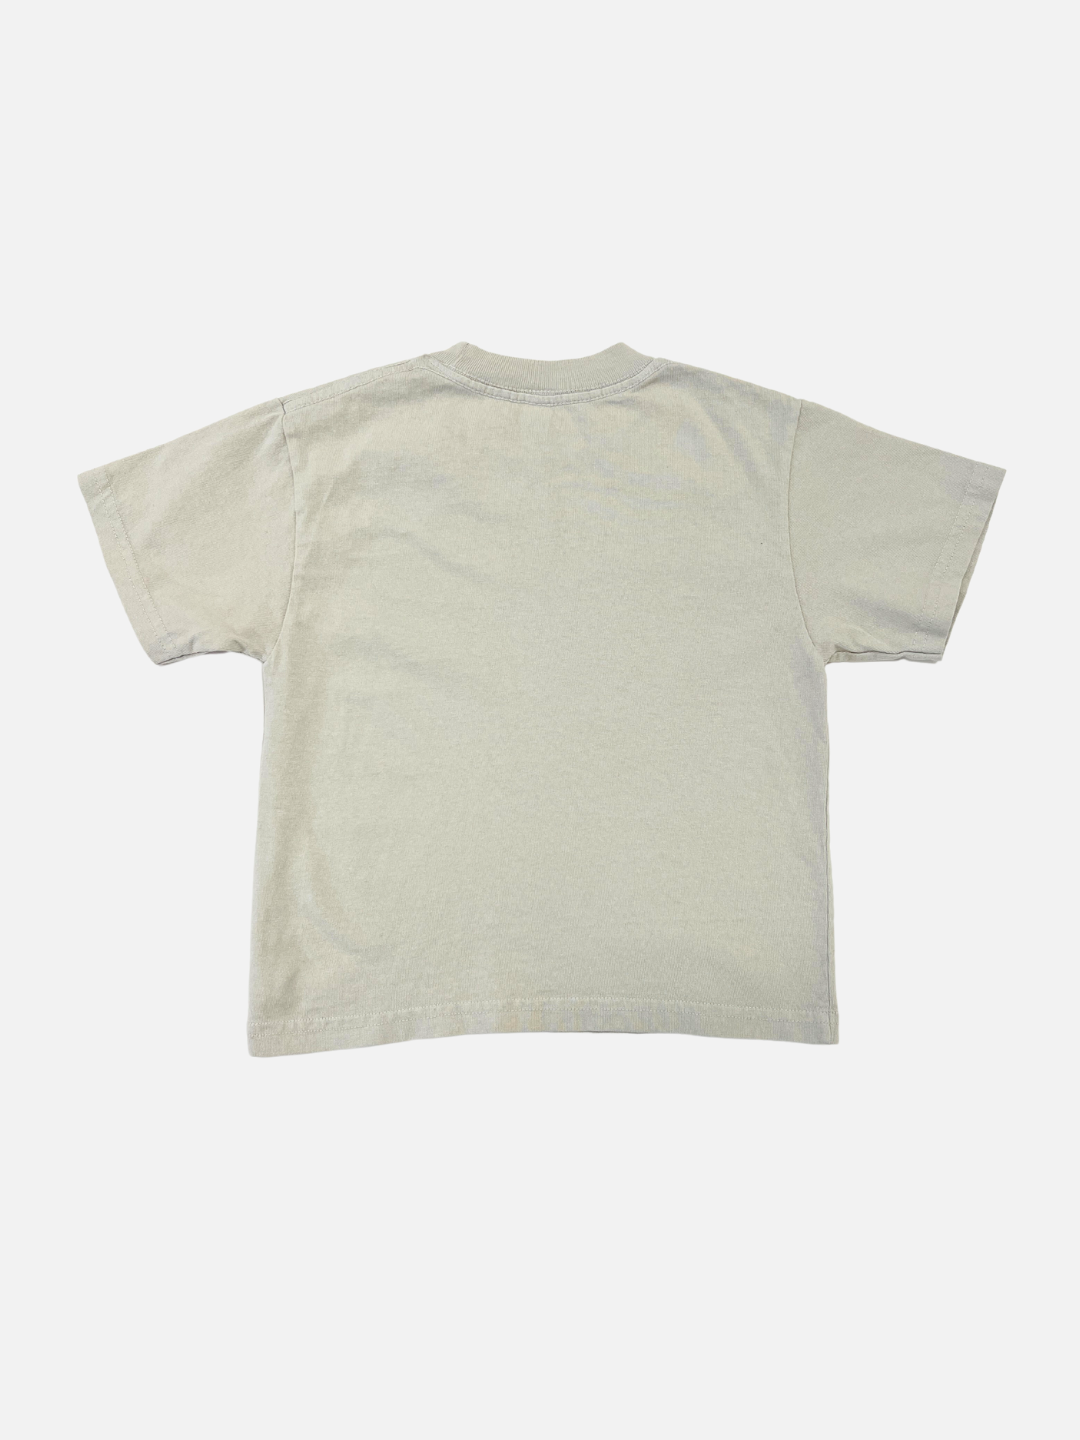 Cement | Back view of a kids cement grey t-shirt with short sleeves.